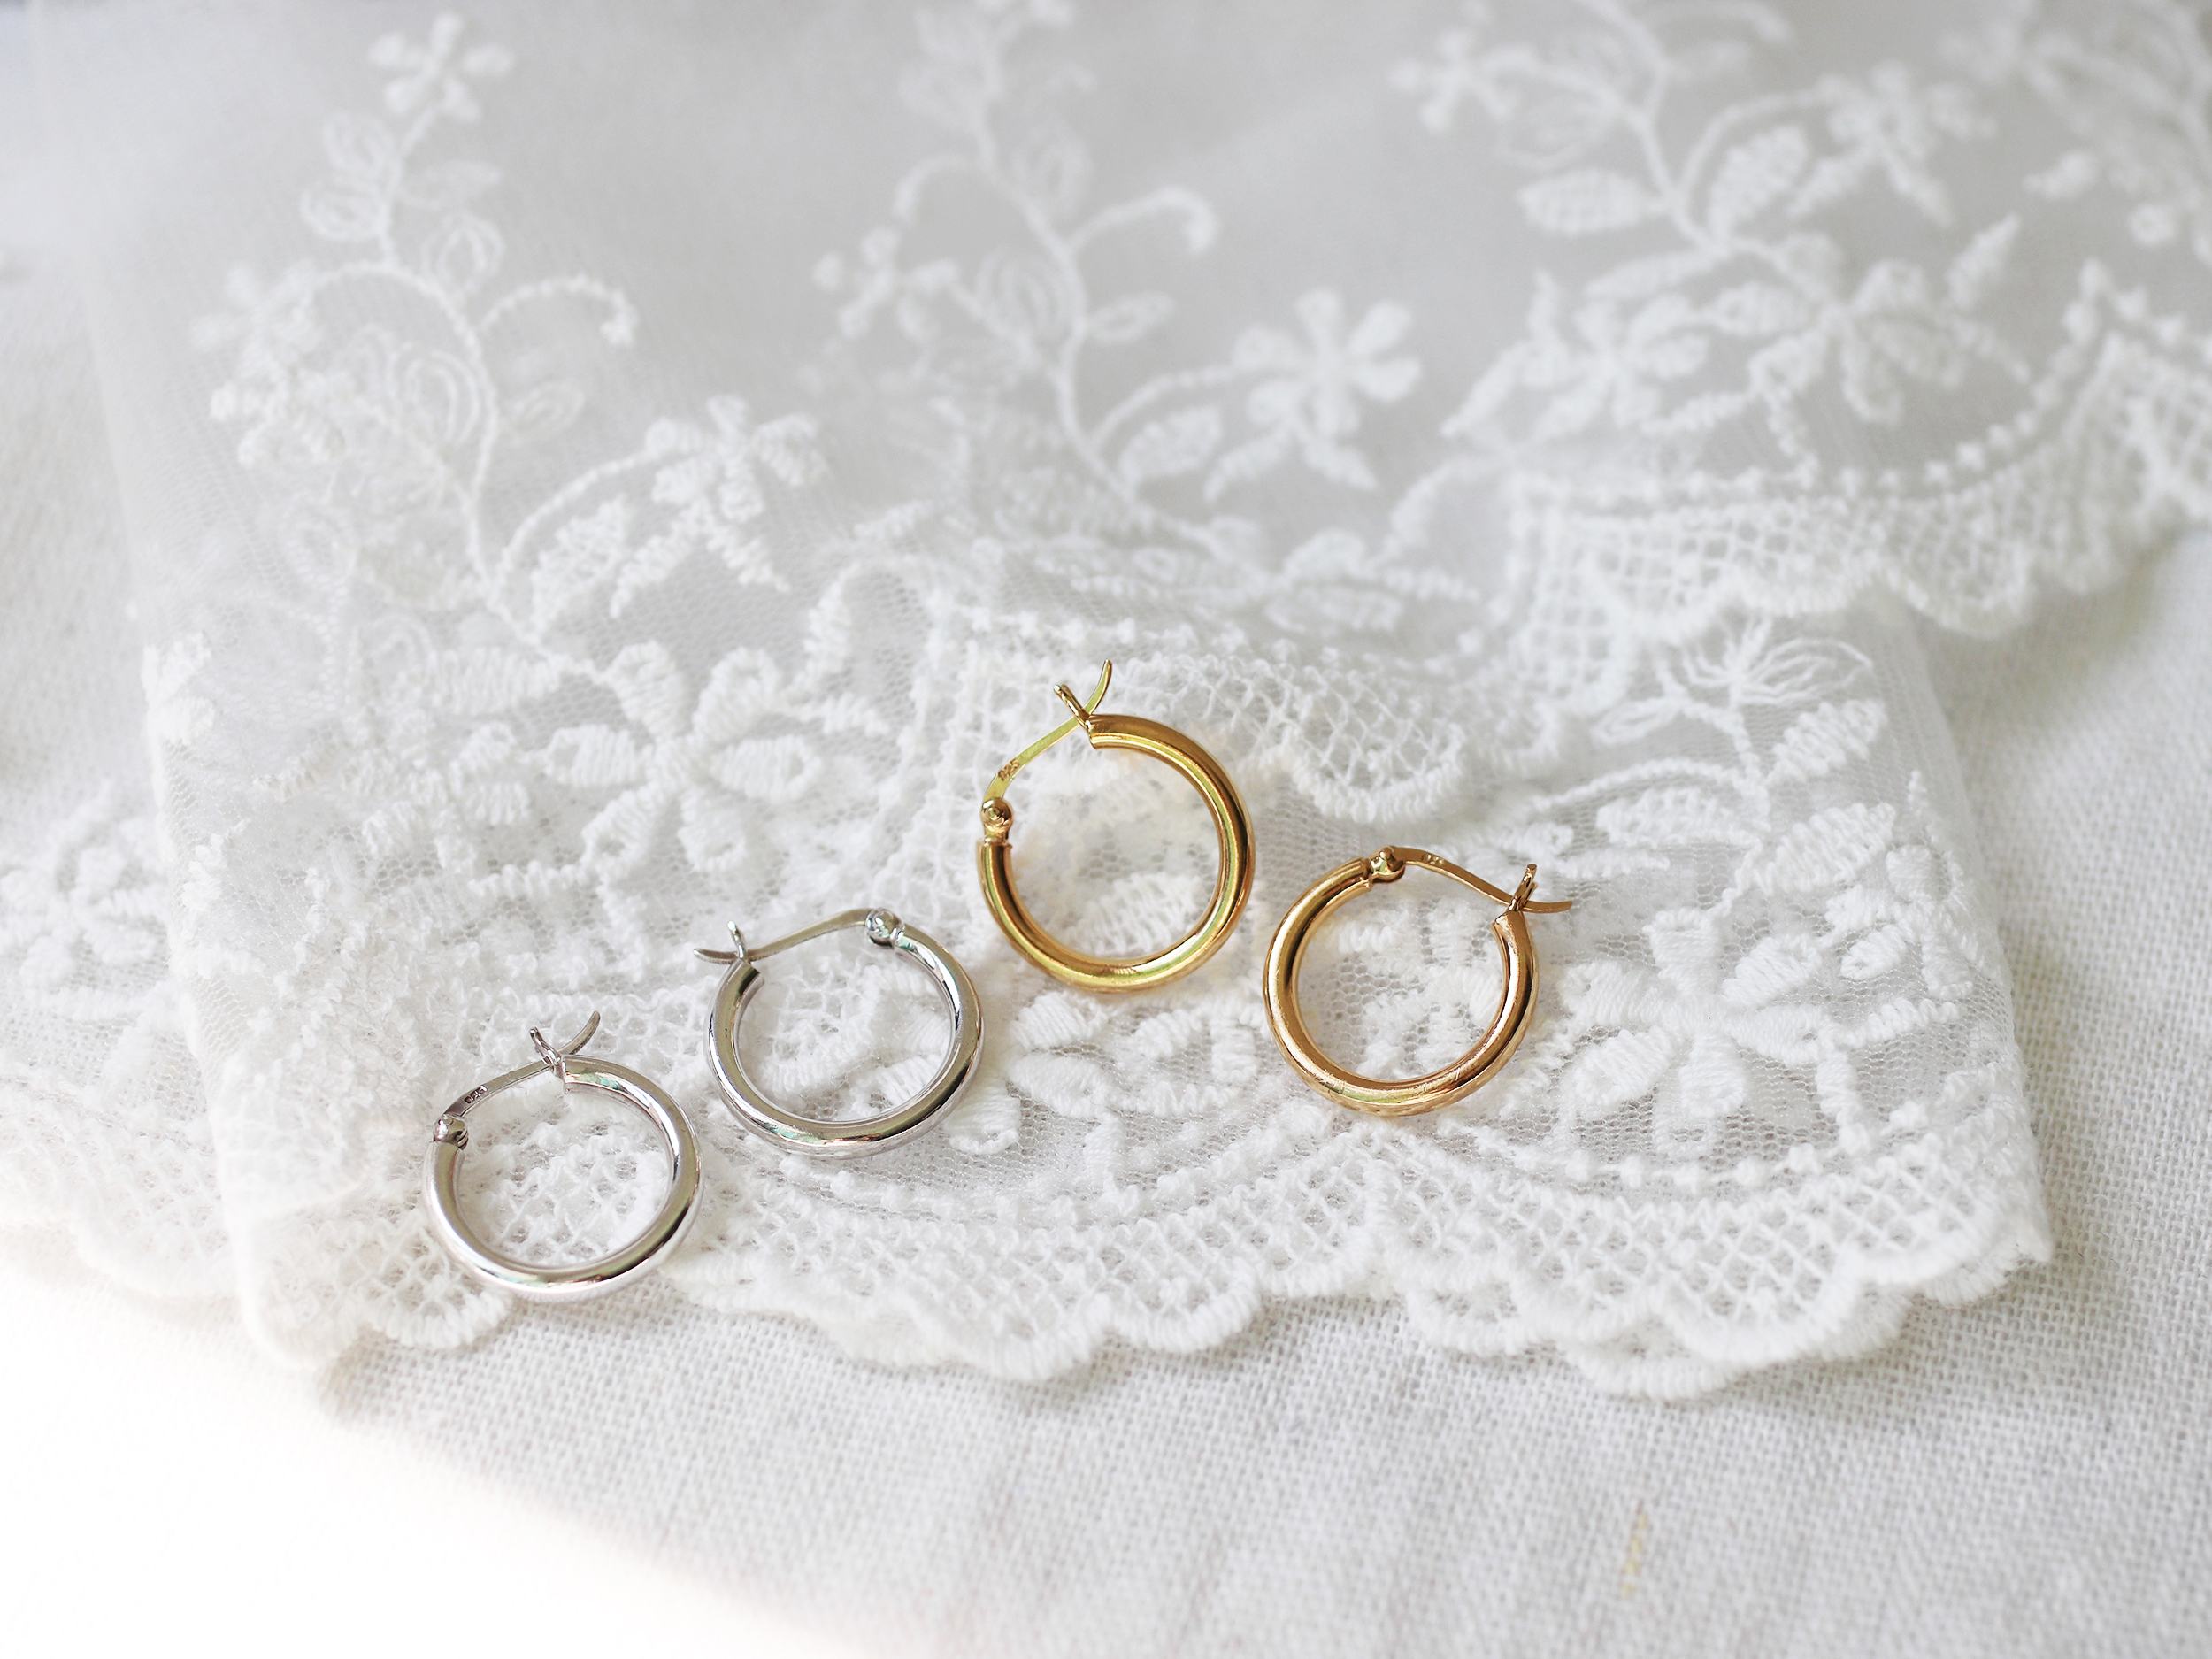 Ring in a Ring-Daily Wear Ear Rings – Shilphaat.com